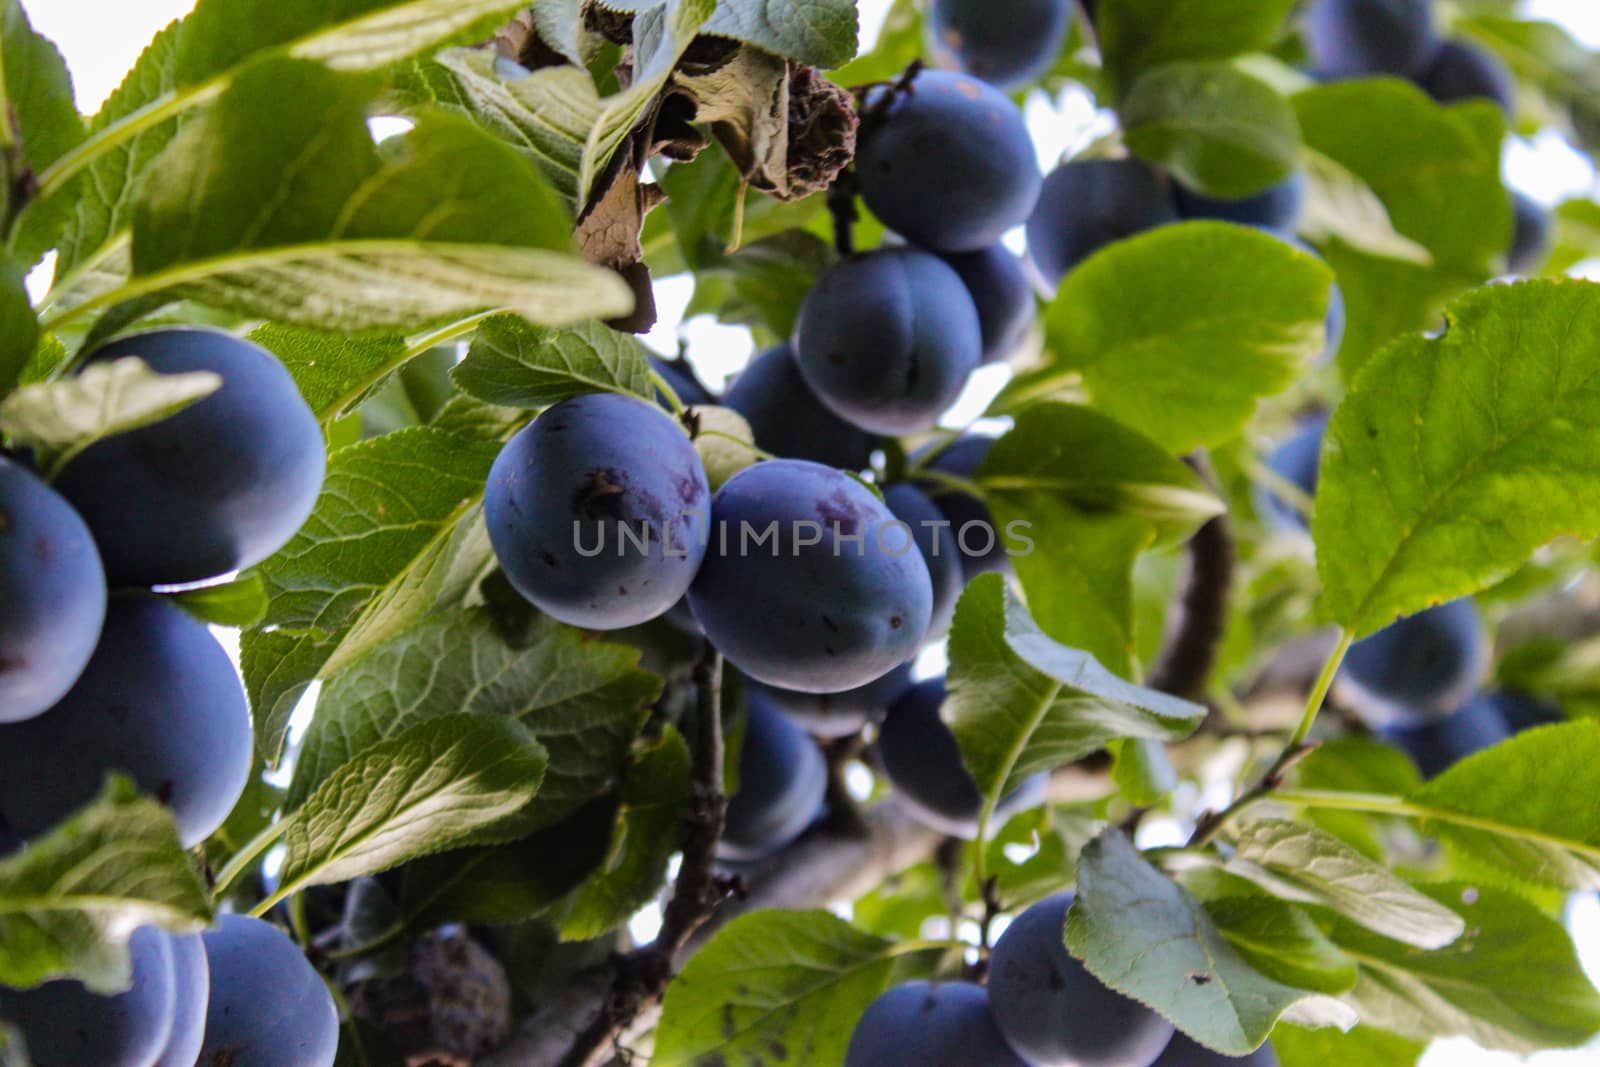 Lots of blue ripe plums among the leaves, photographed under the branch. by mahirrov